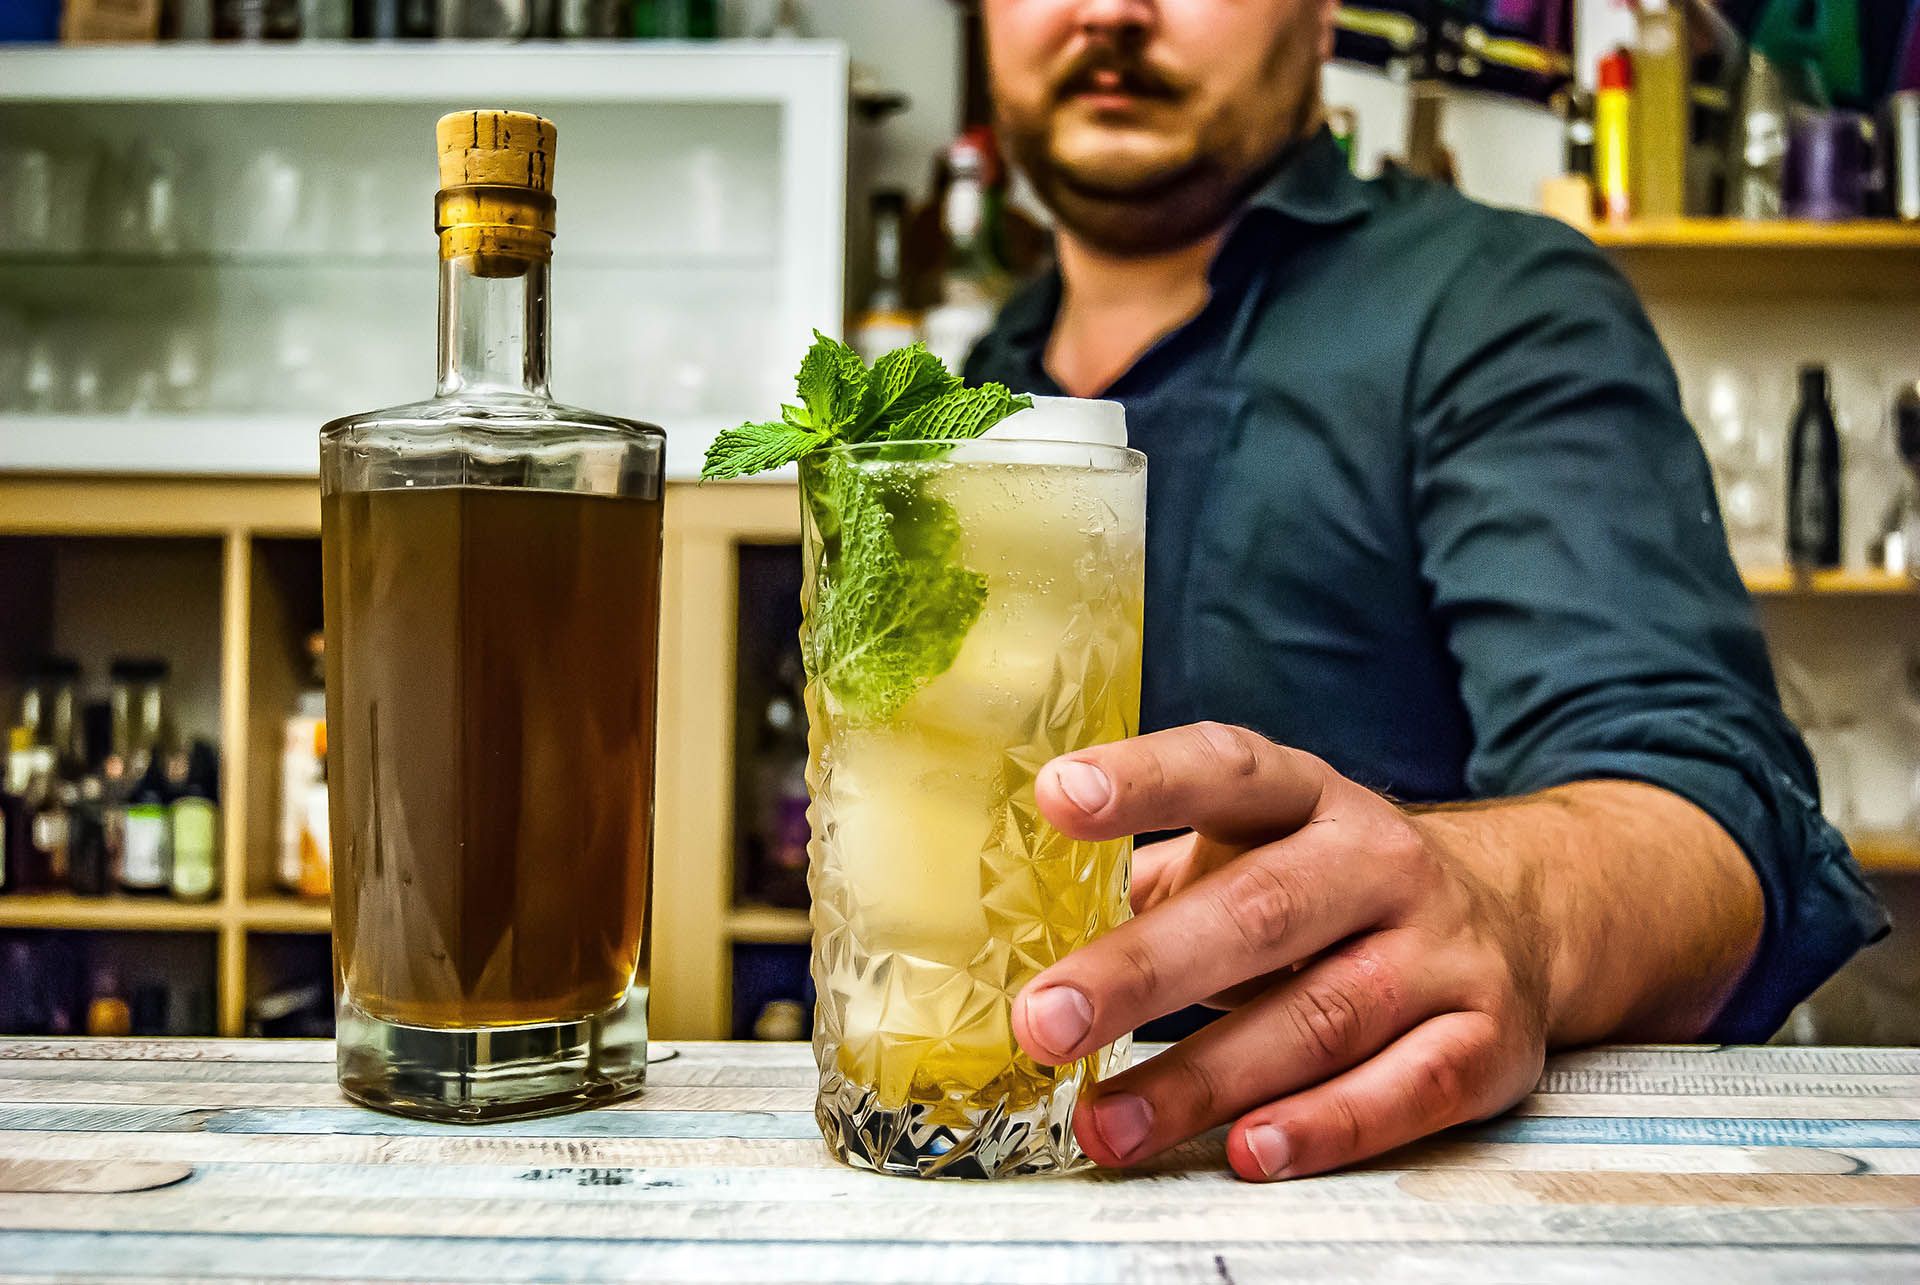 cannabis-infused beverages, cannabis infused beverages, cannabis beverages, cannabis cocktails, cannabis infused cocktails